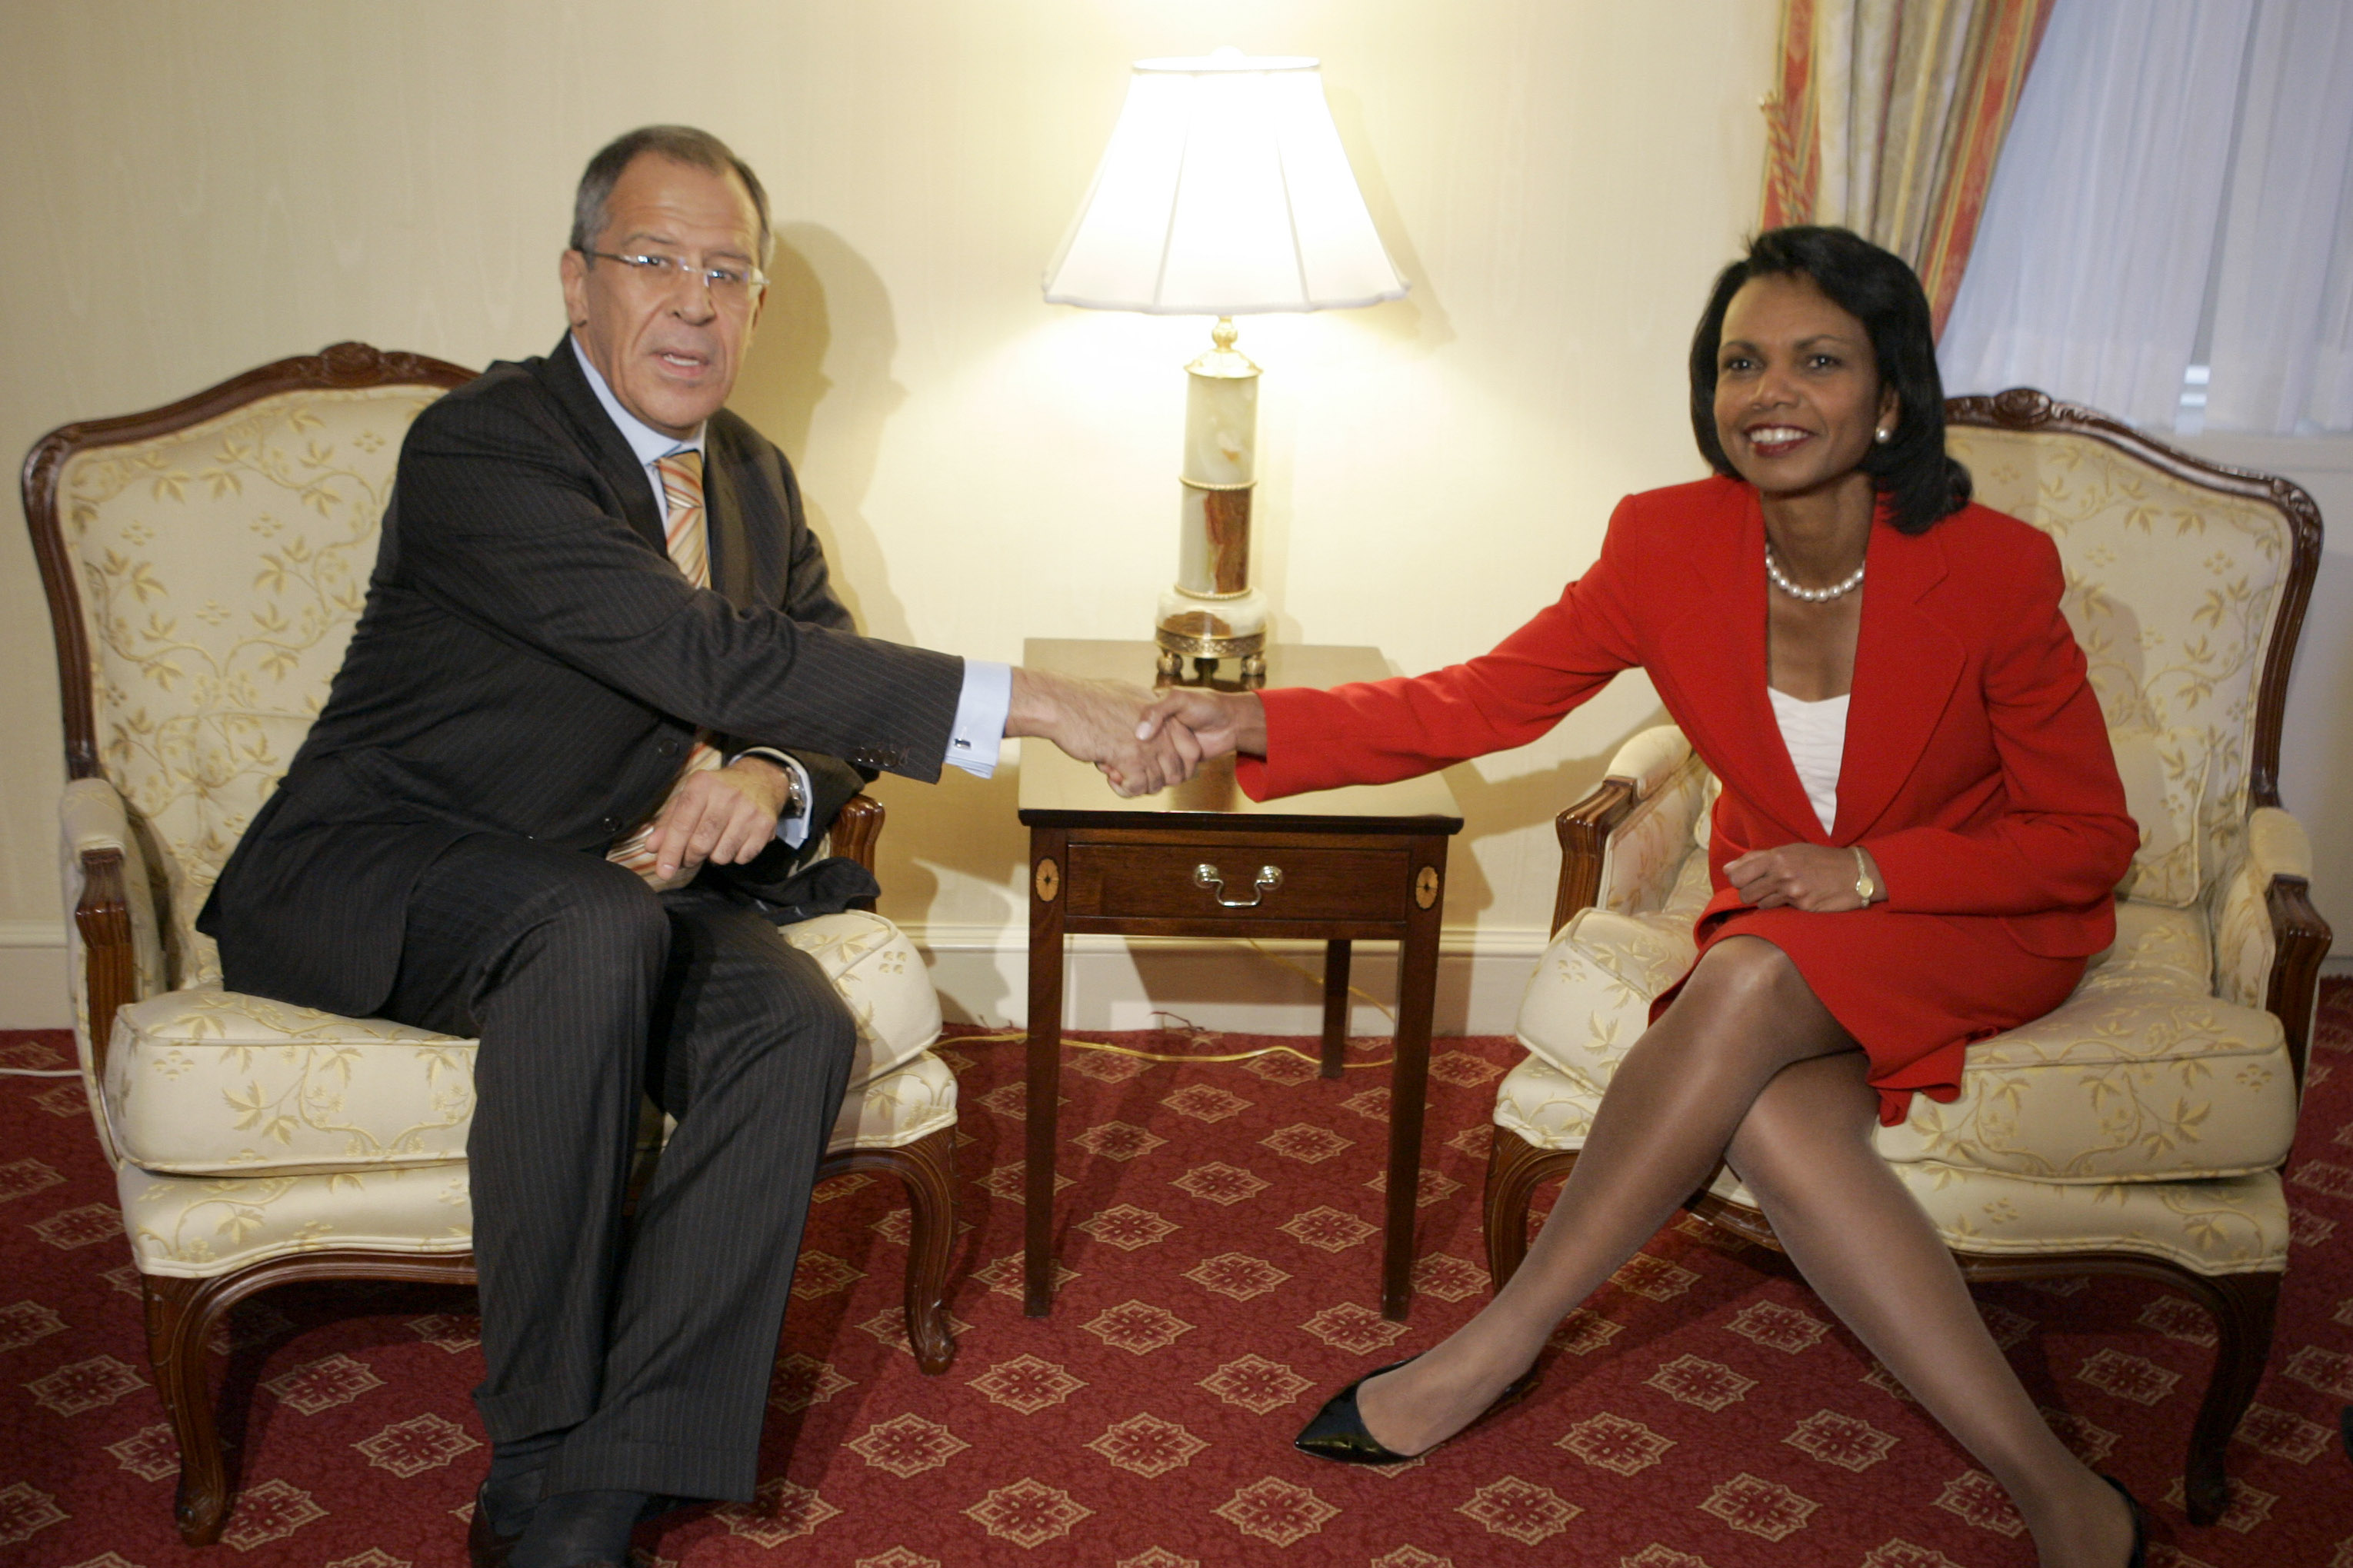 US Secretary of State Condoleezza Rice and Russian Minister of Foreign Affairs Sergey Lavrov meet at the Waldorf Astoria hotel, in Septembre 2008 in New York.